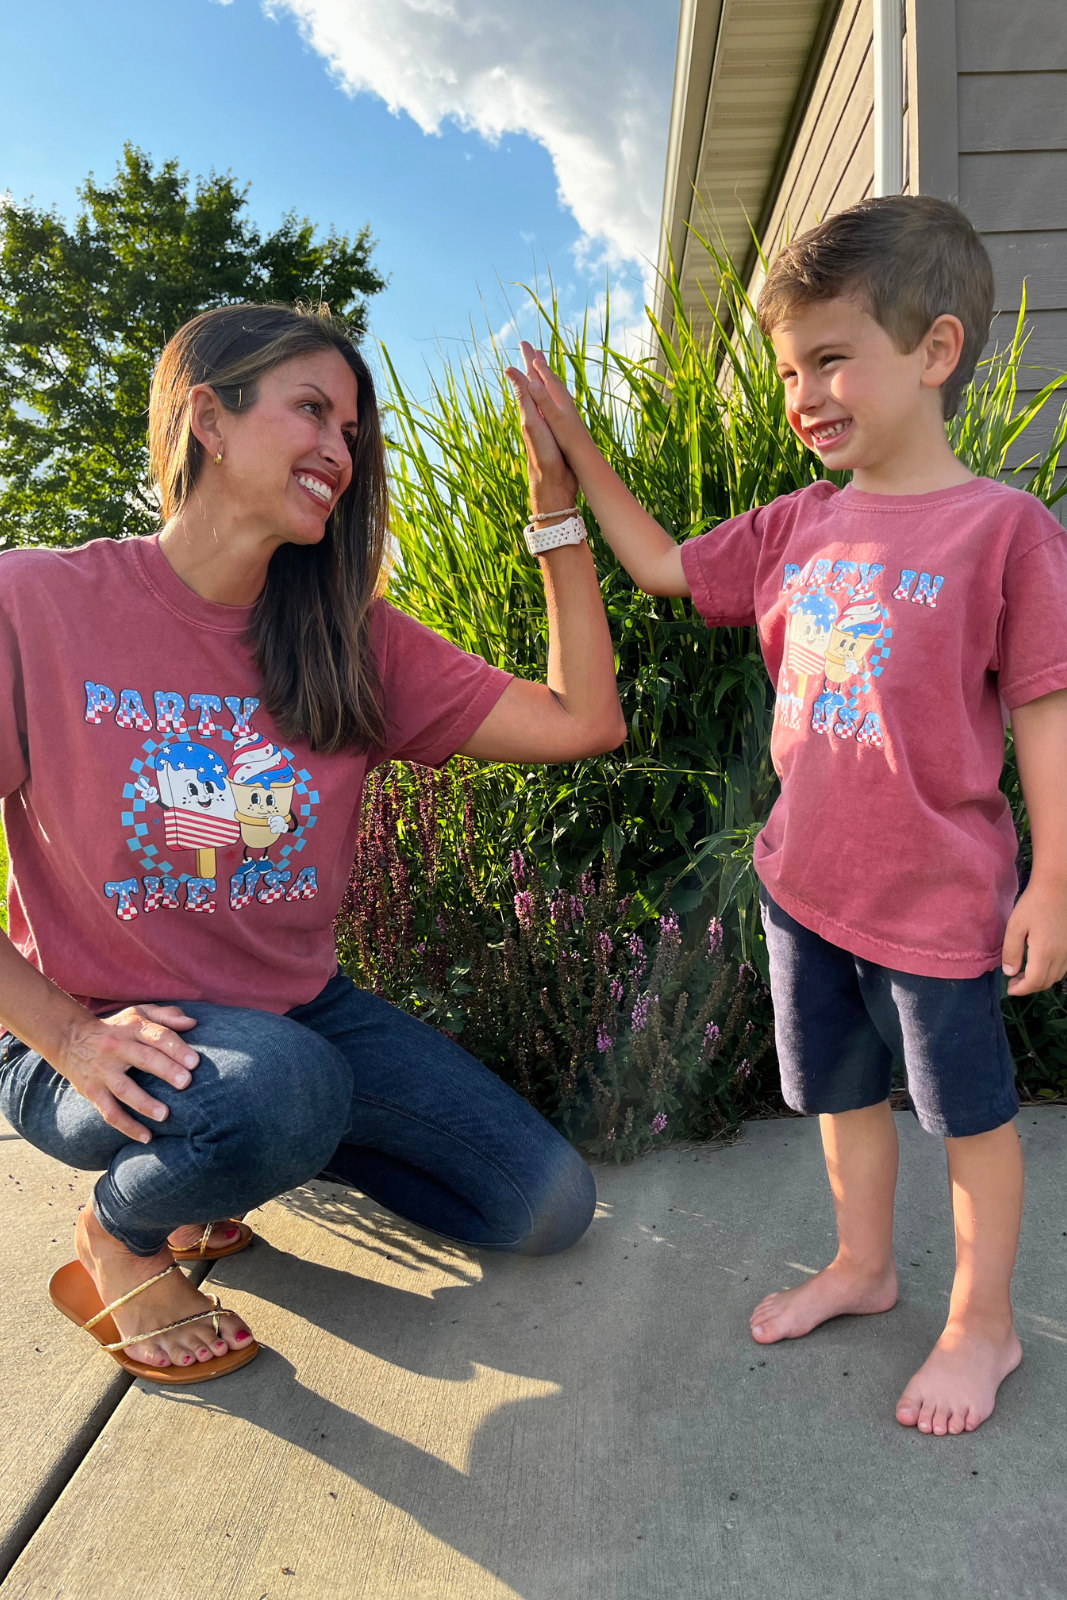 Party in the USA Tee for Kids